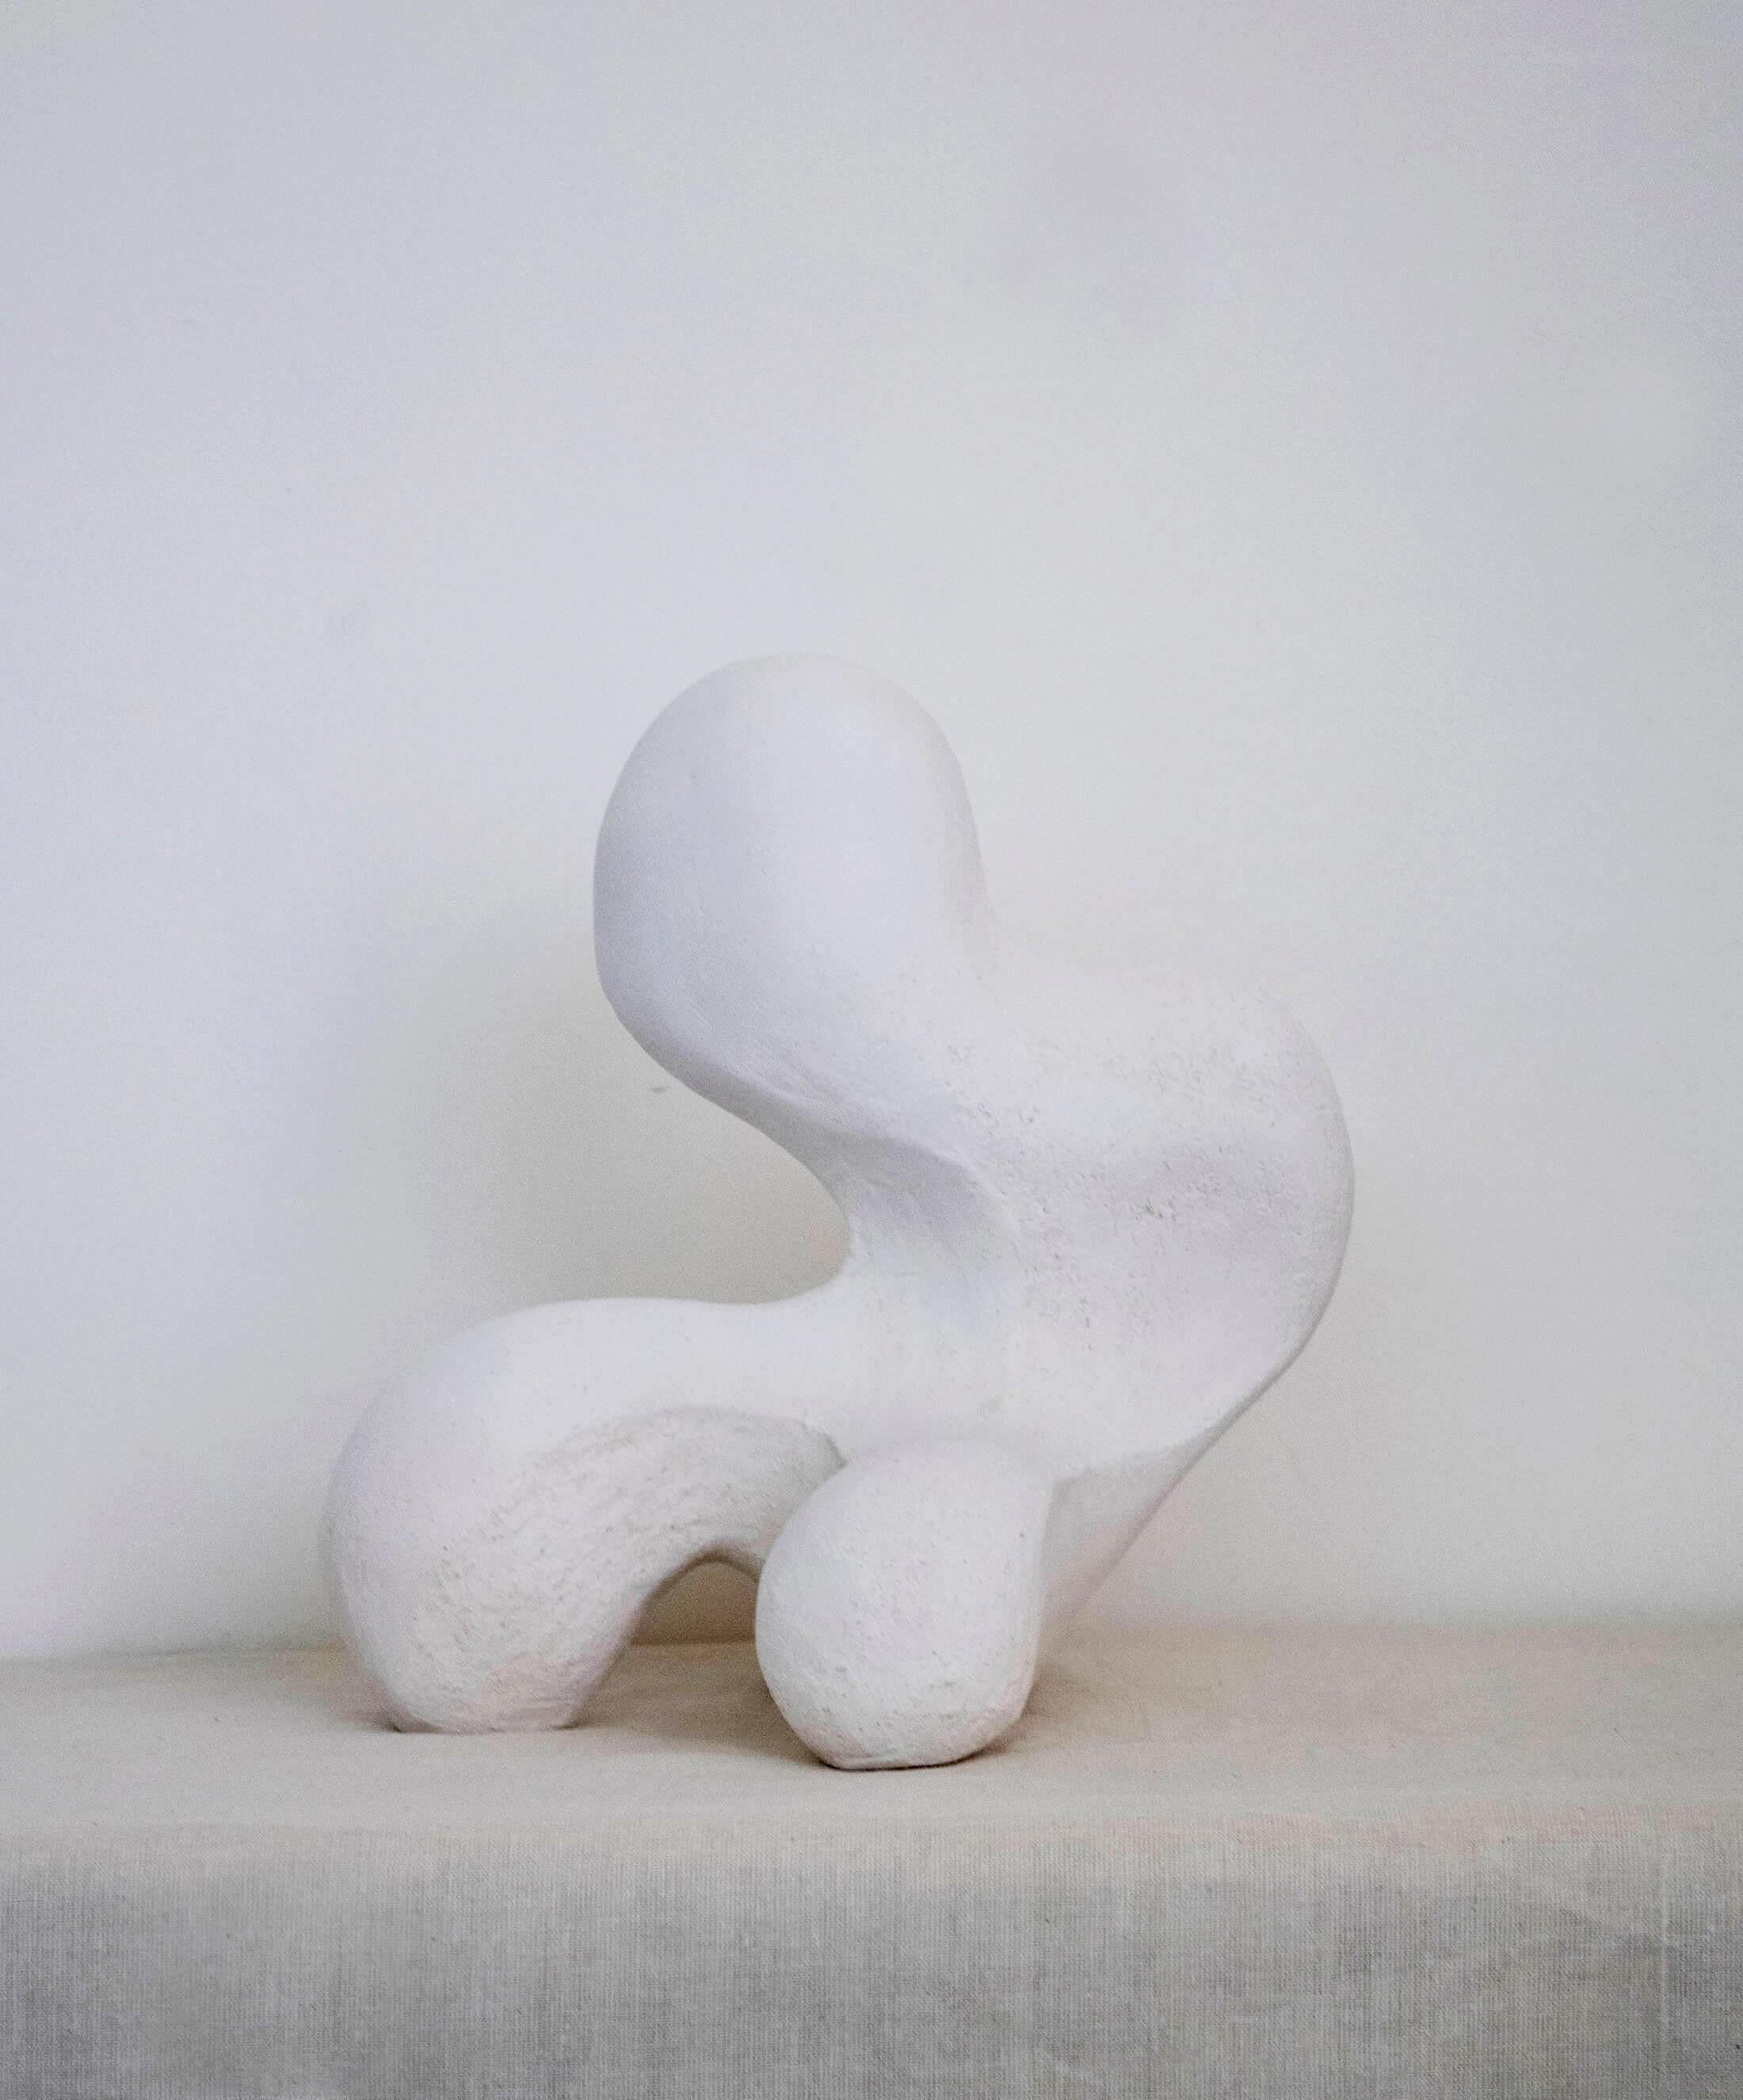 Buddy No_002 Sculpture by AOAO
Dimensions: W 23 x D 28 x H 30 cm
Materials: Ceramic Bisque
Color options available upon request.

The idea was born after deciding to reconnect with my family and my grandfather – a sculptor artist. Learning to